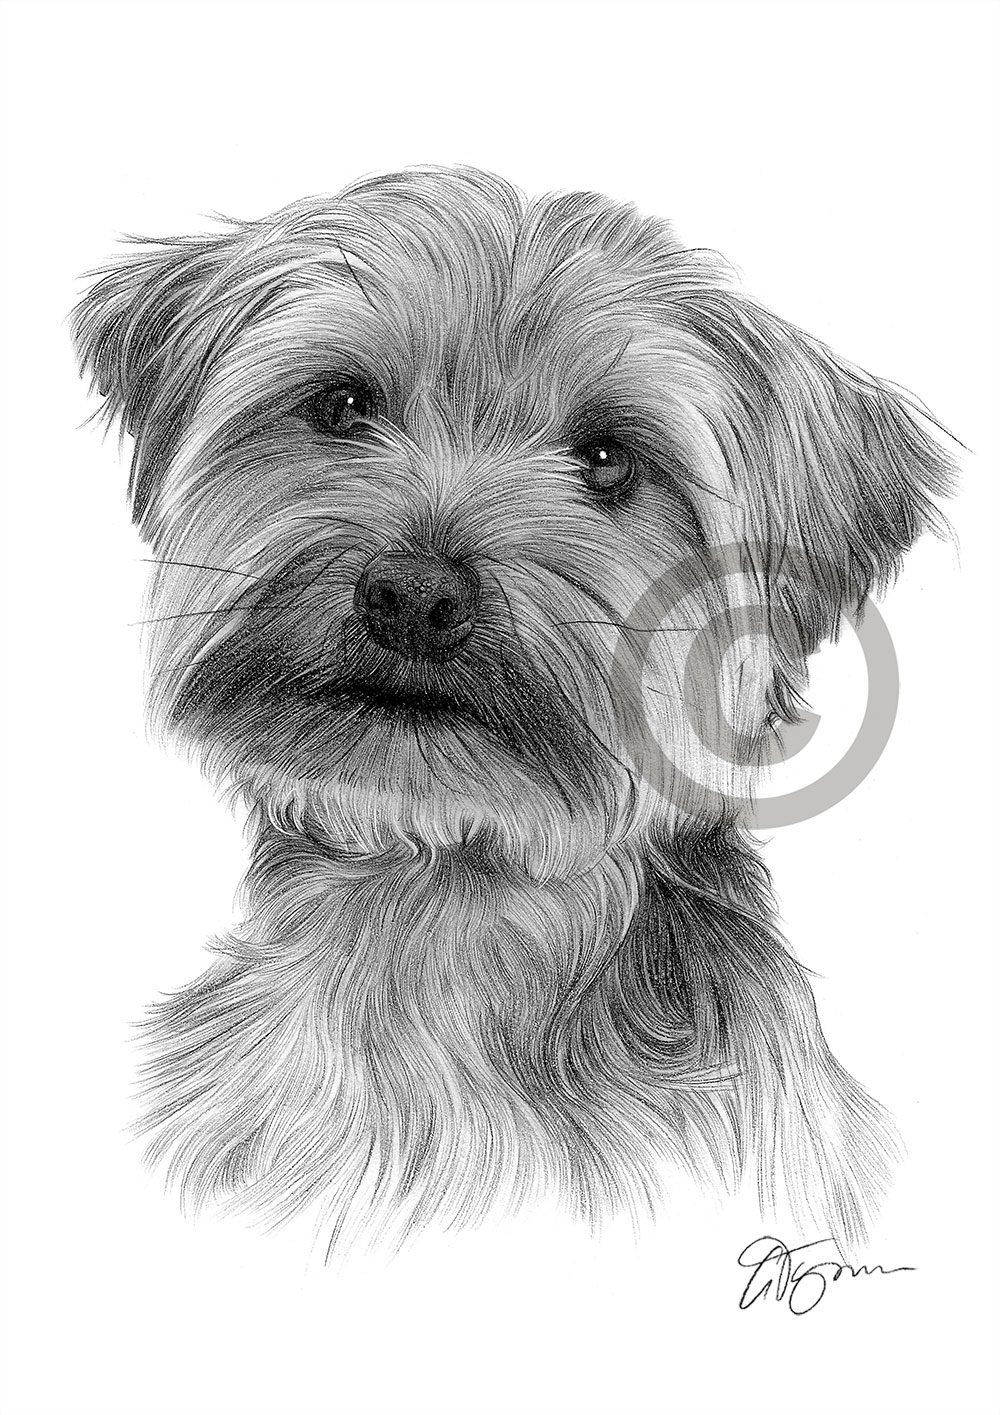 Pencil drawing of a young Yorkshire Terrier by artist Gary Tymon